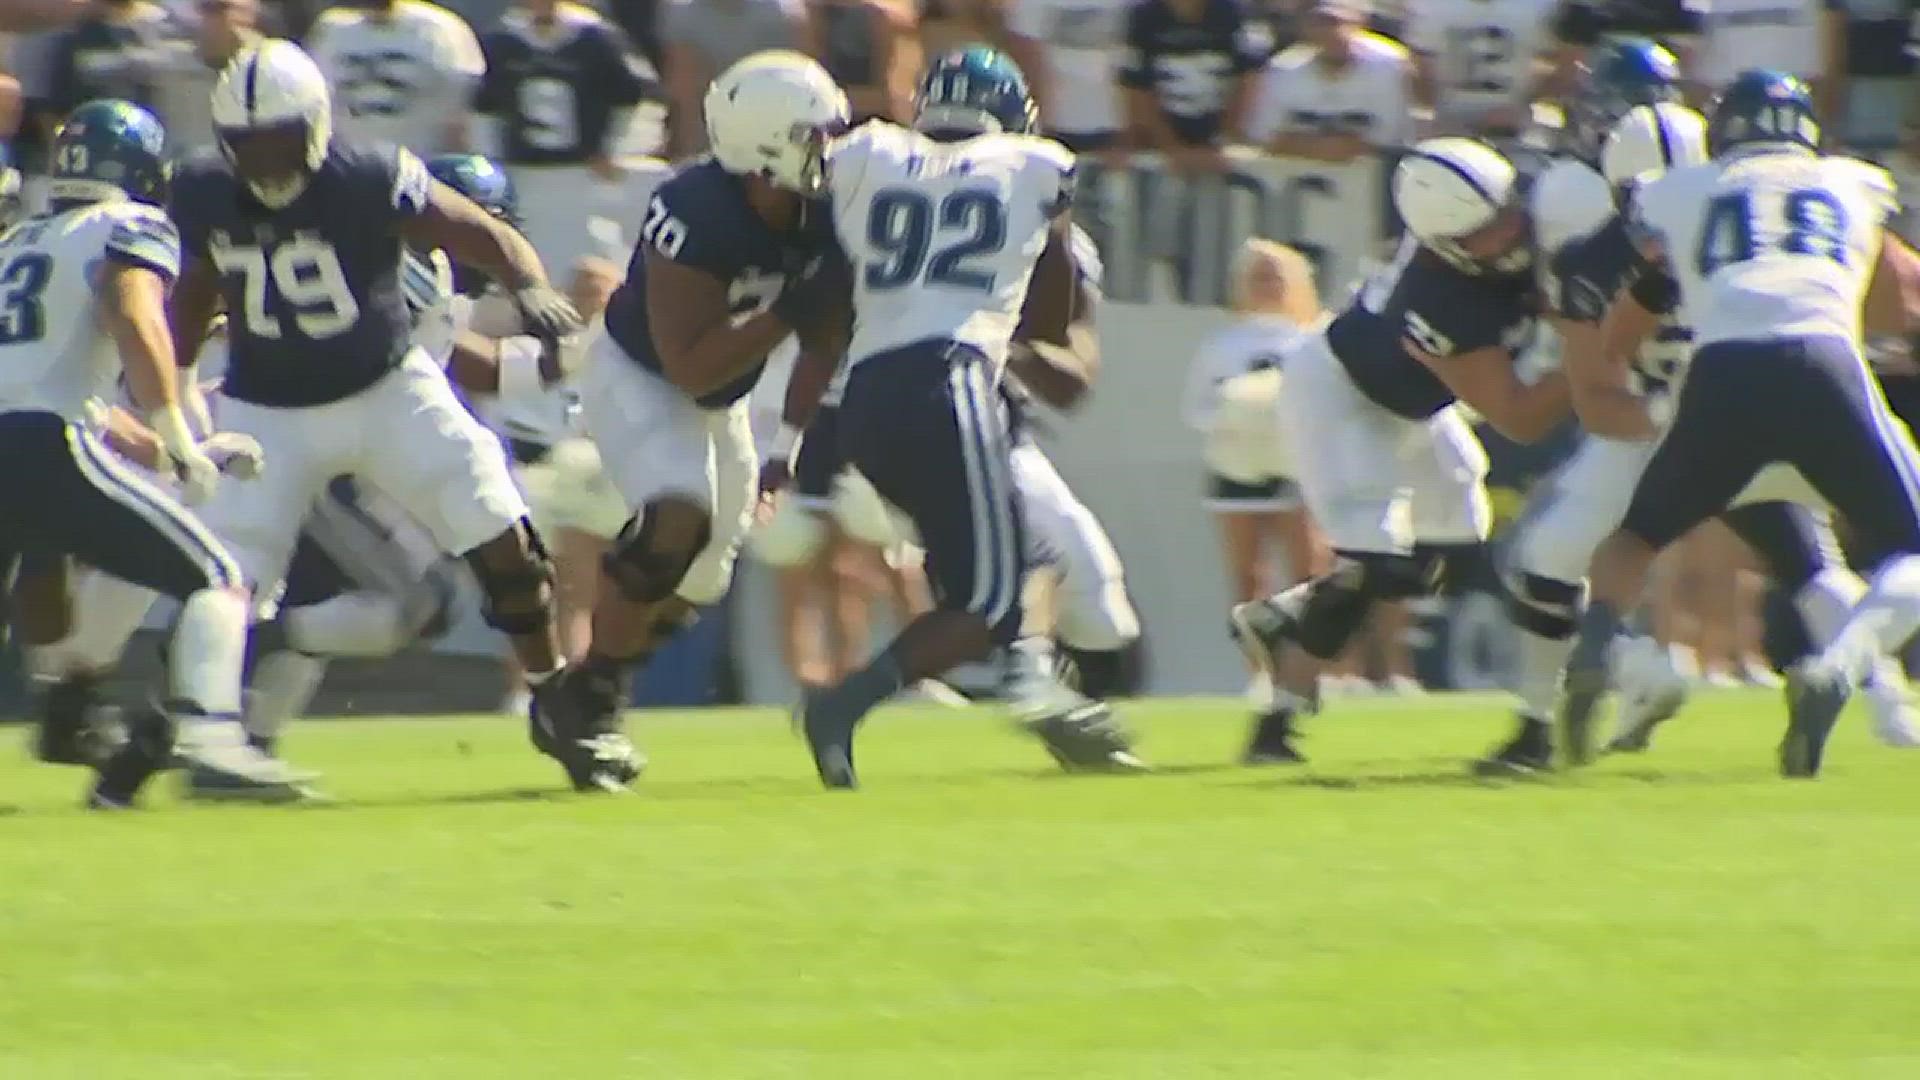 Does PSU have the toughness needed up front